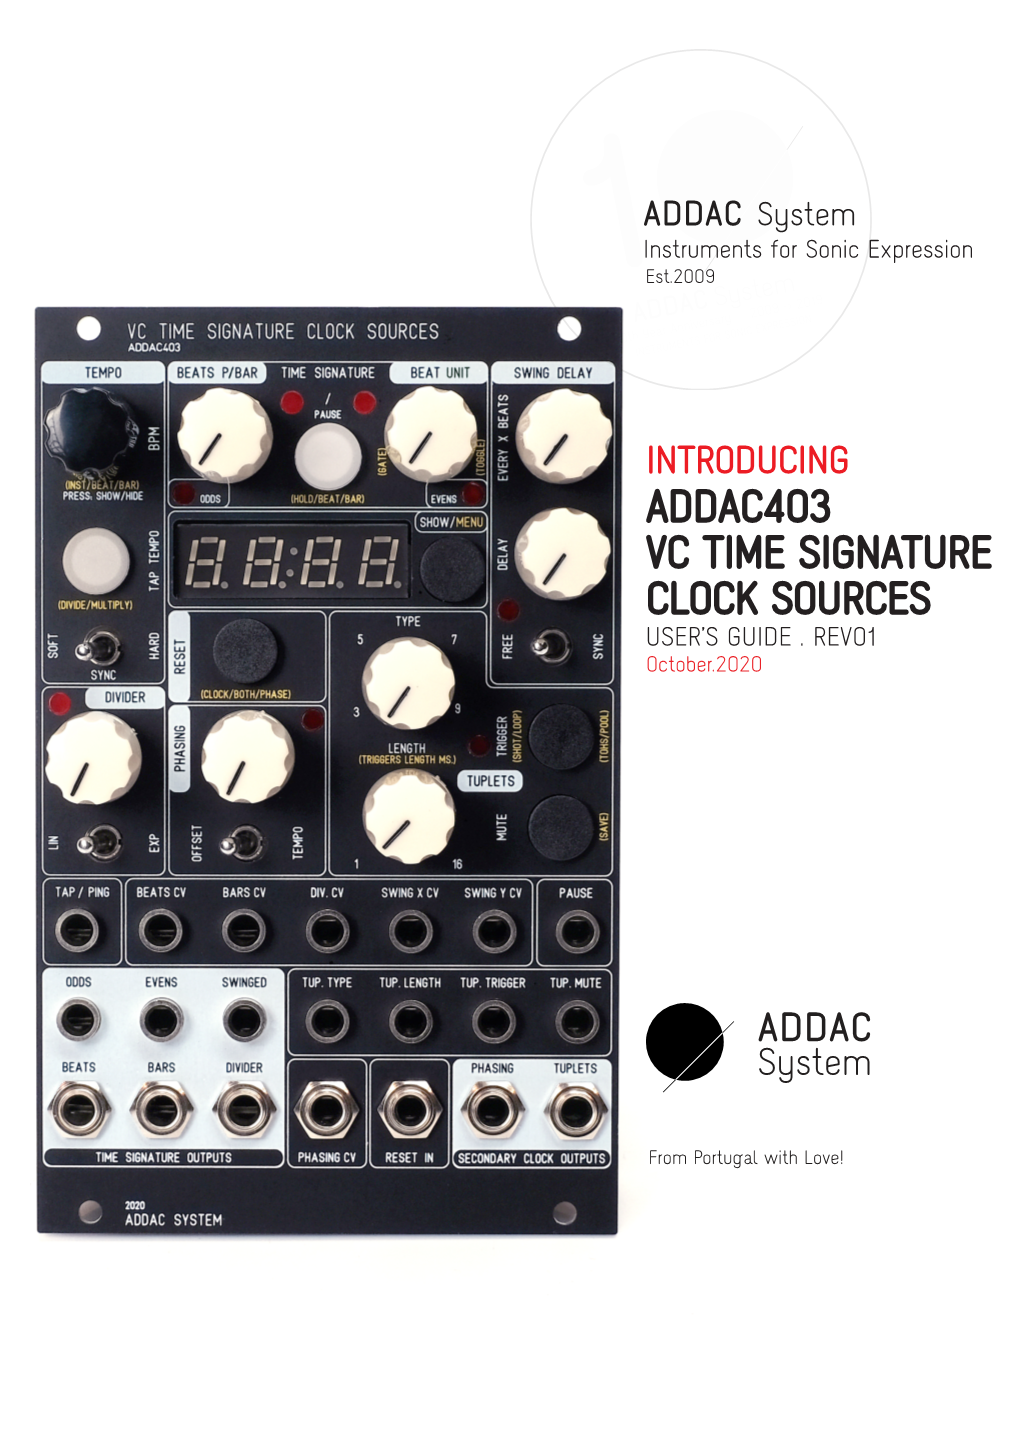 Addac403 Vc Time Signature Clock Sources User’S Guide